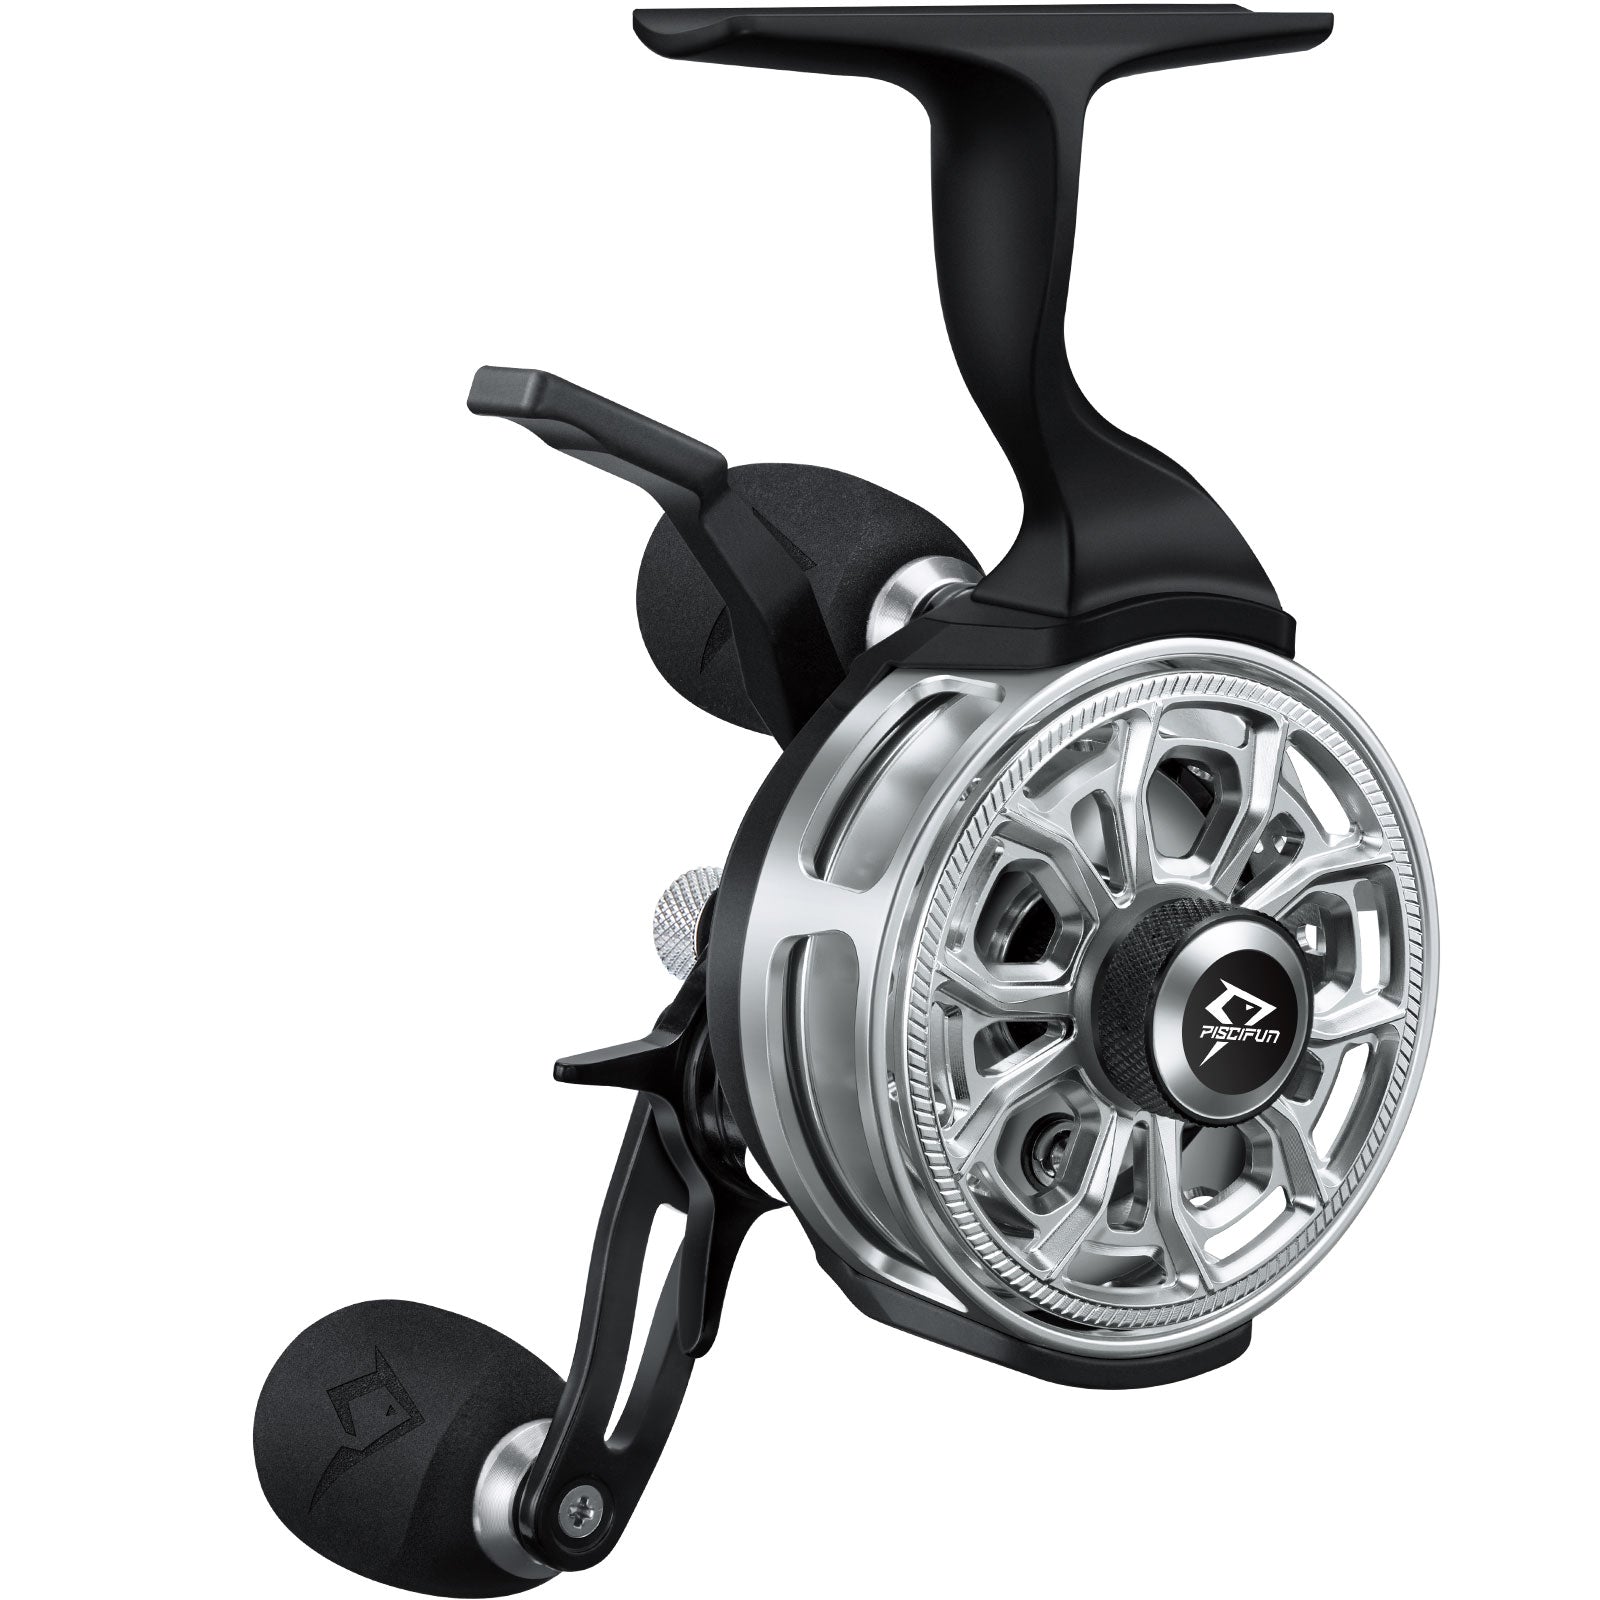 Piscifun - The Brand New ICX P Inline Ice Fishing Reel is